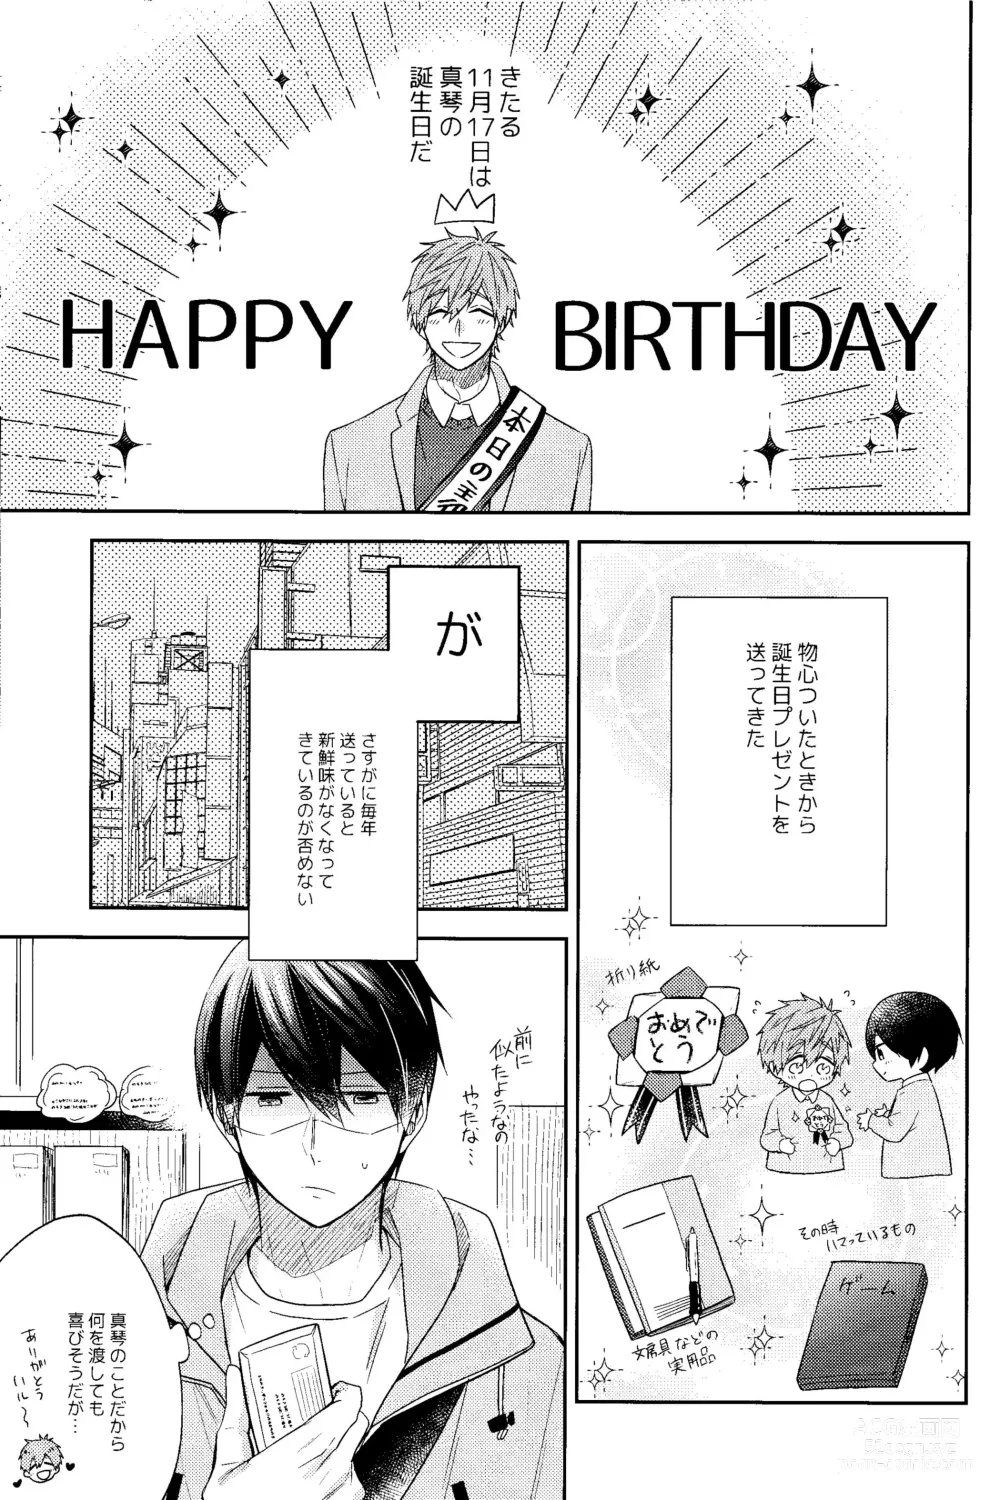 Page 4 of doujinshi Happy Birthday present is me